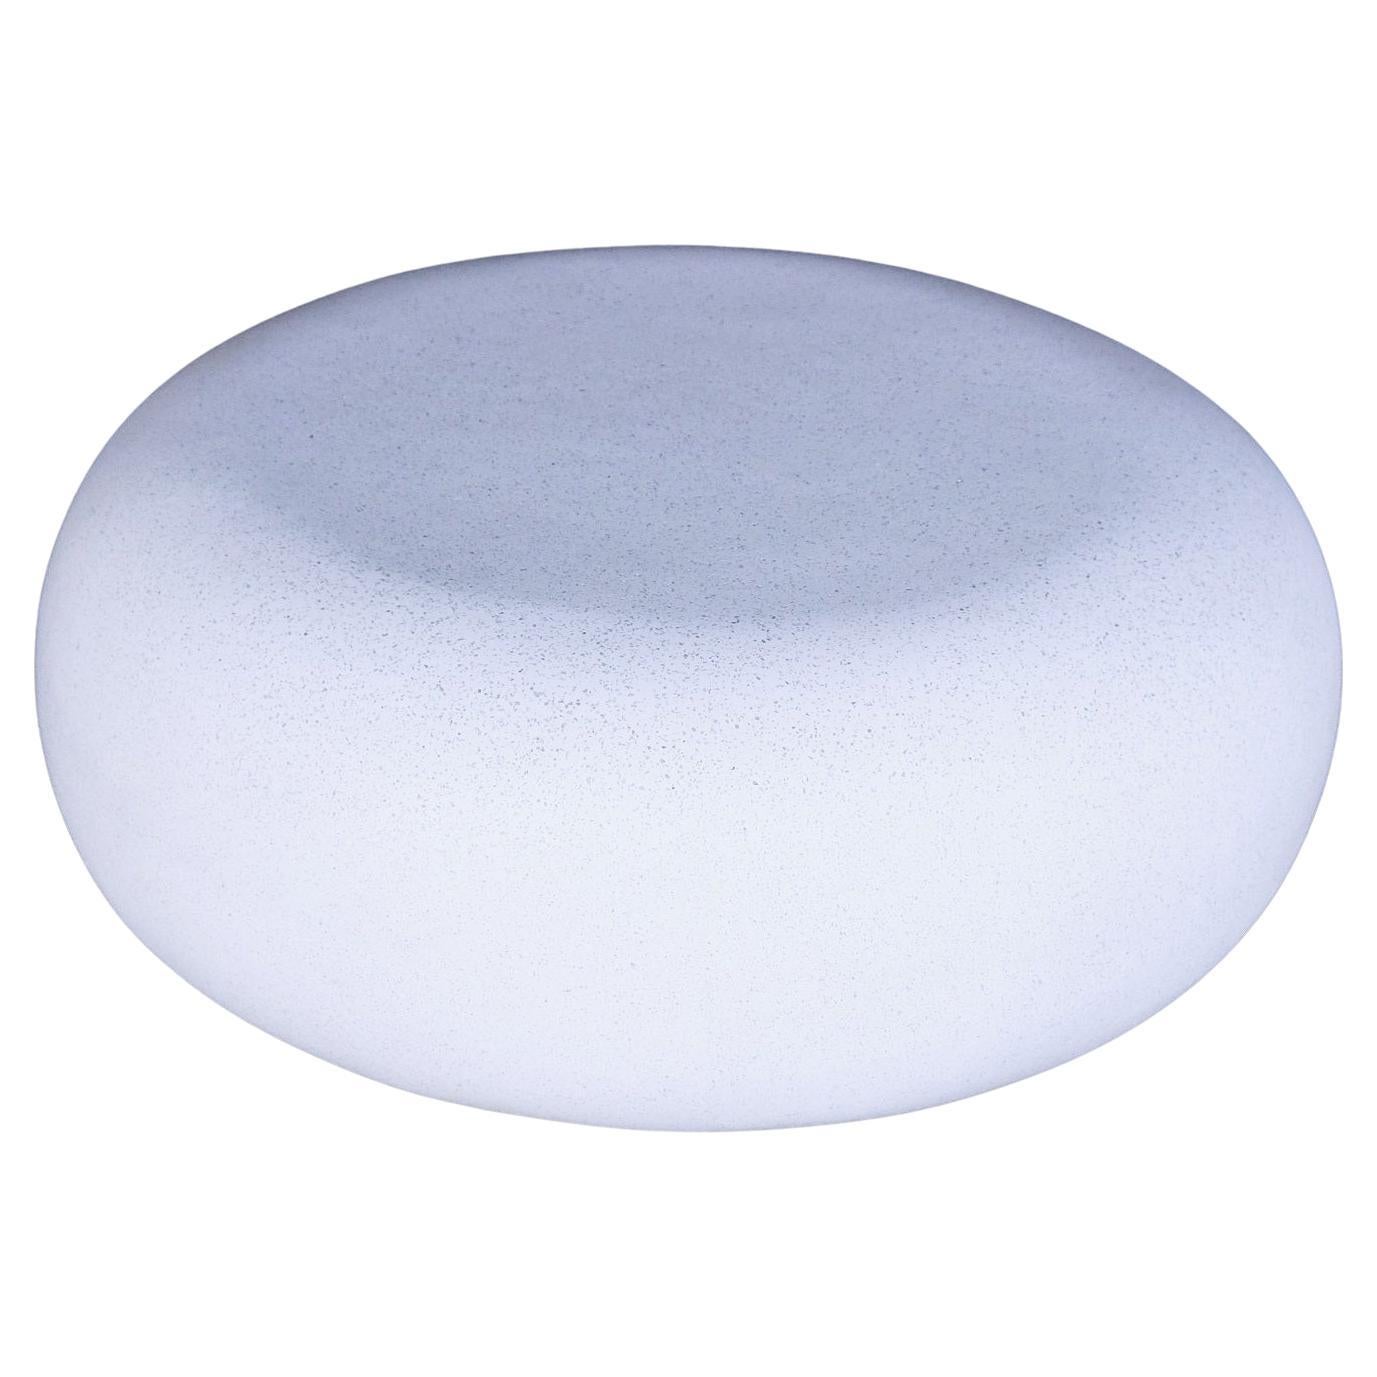 Cast Resin 'Pebble' Cocktail Table, White Stone Finish by Zachary A. Design For Sale